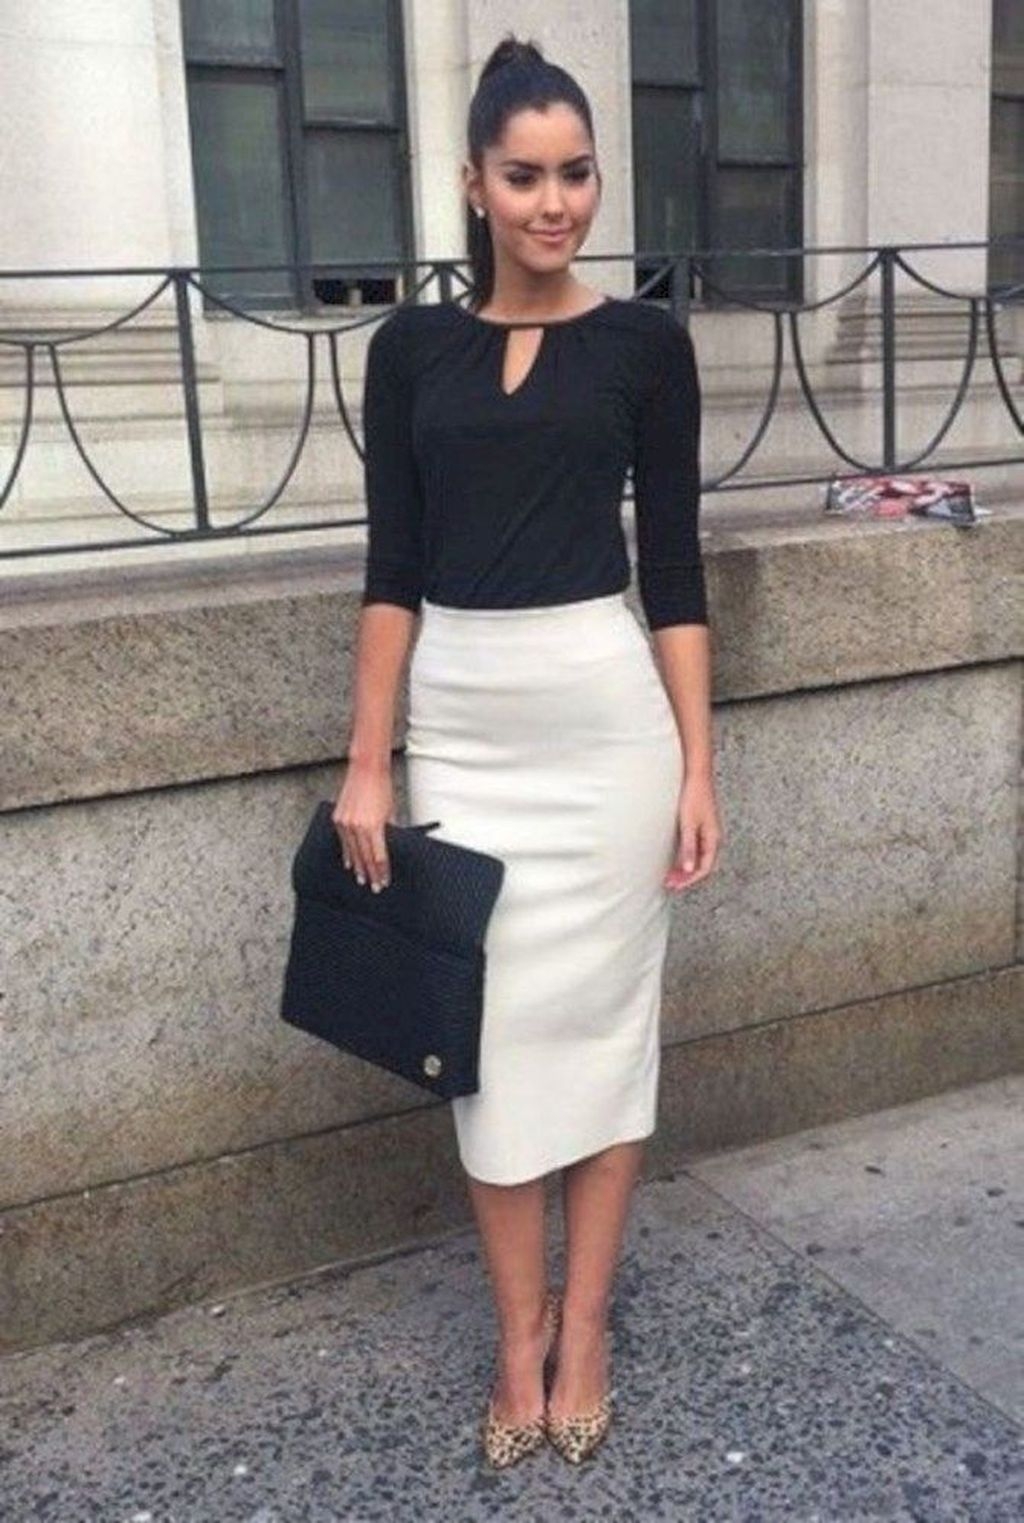 46 Impressive Spring And Summer Work Outfits Ideas For Women - ADDICFASHION